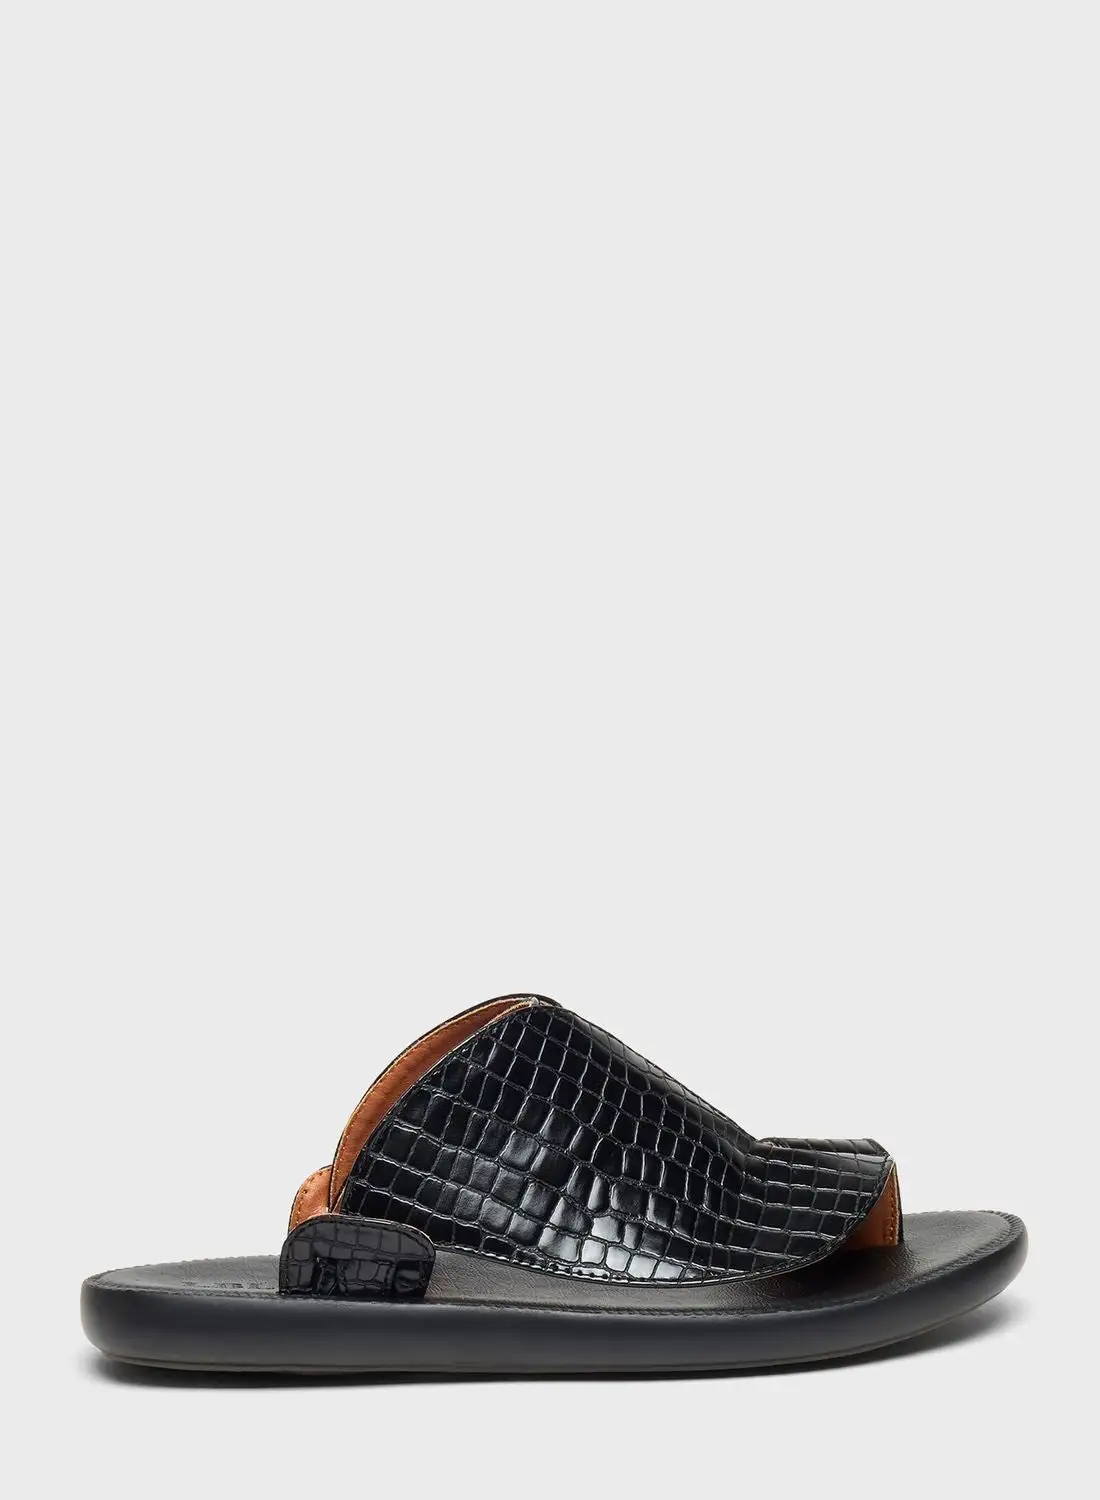 LBL by Shoexpress Casual Comfort Arabic Sandals